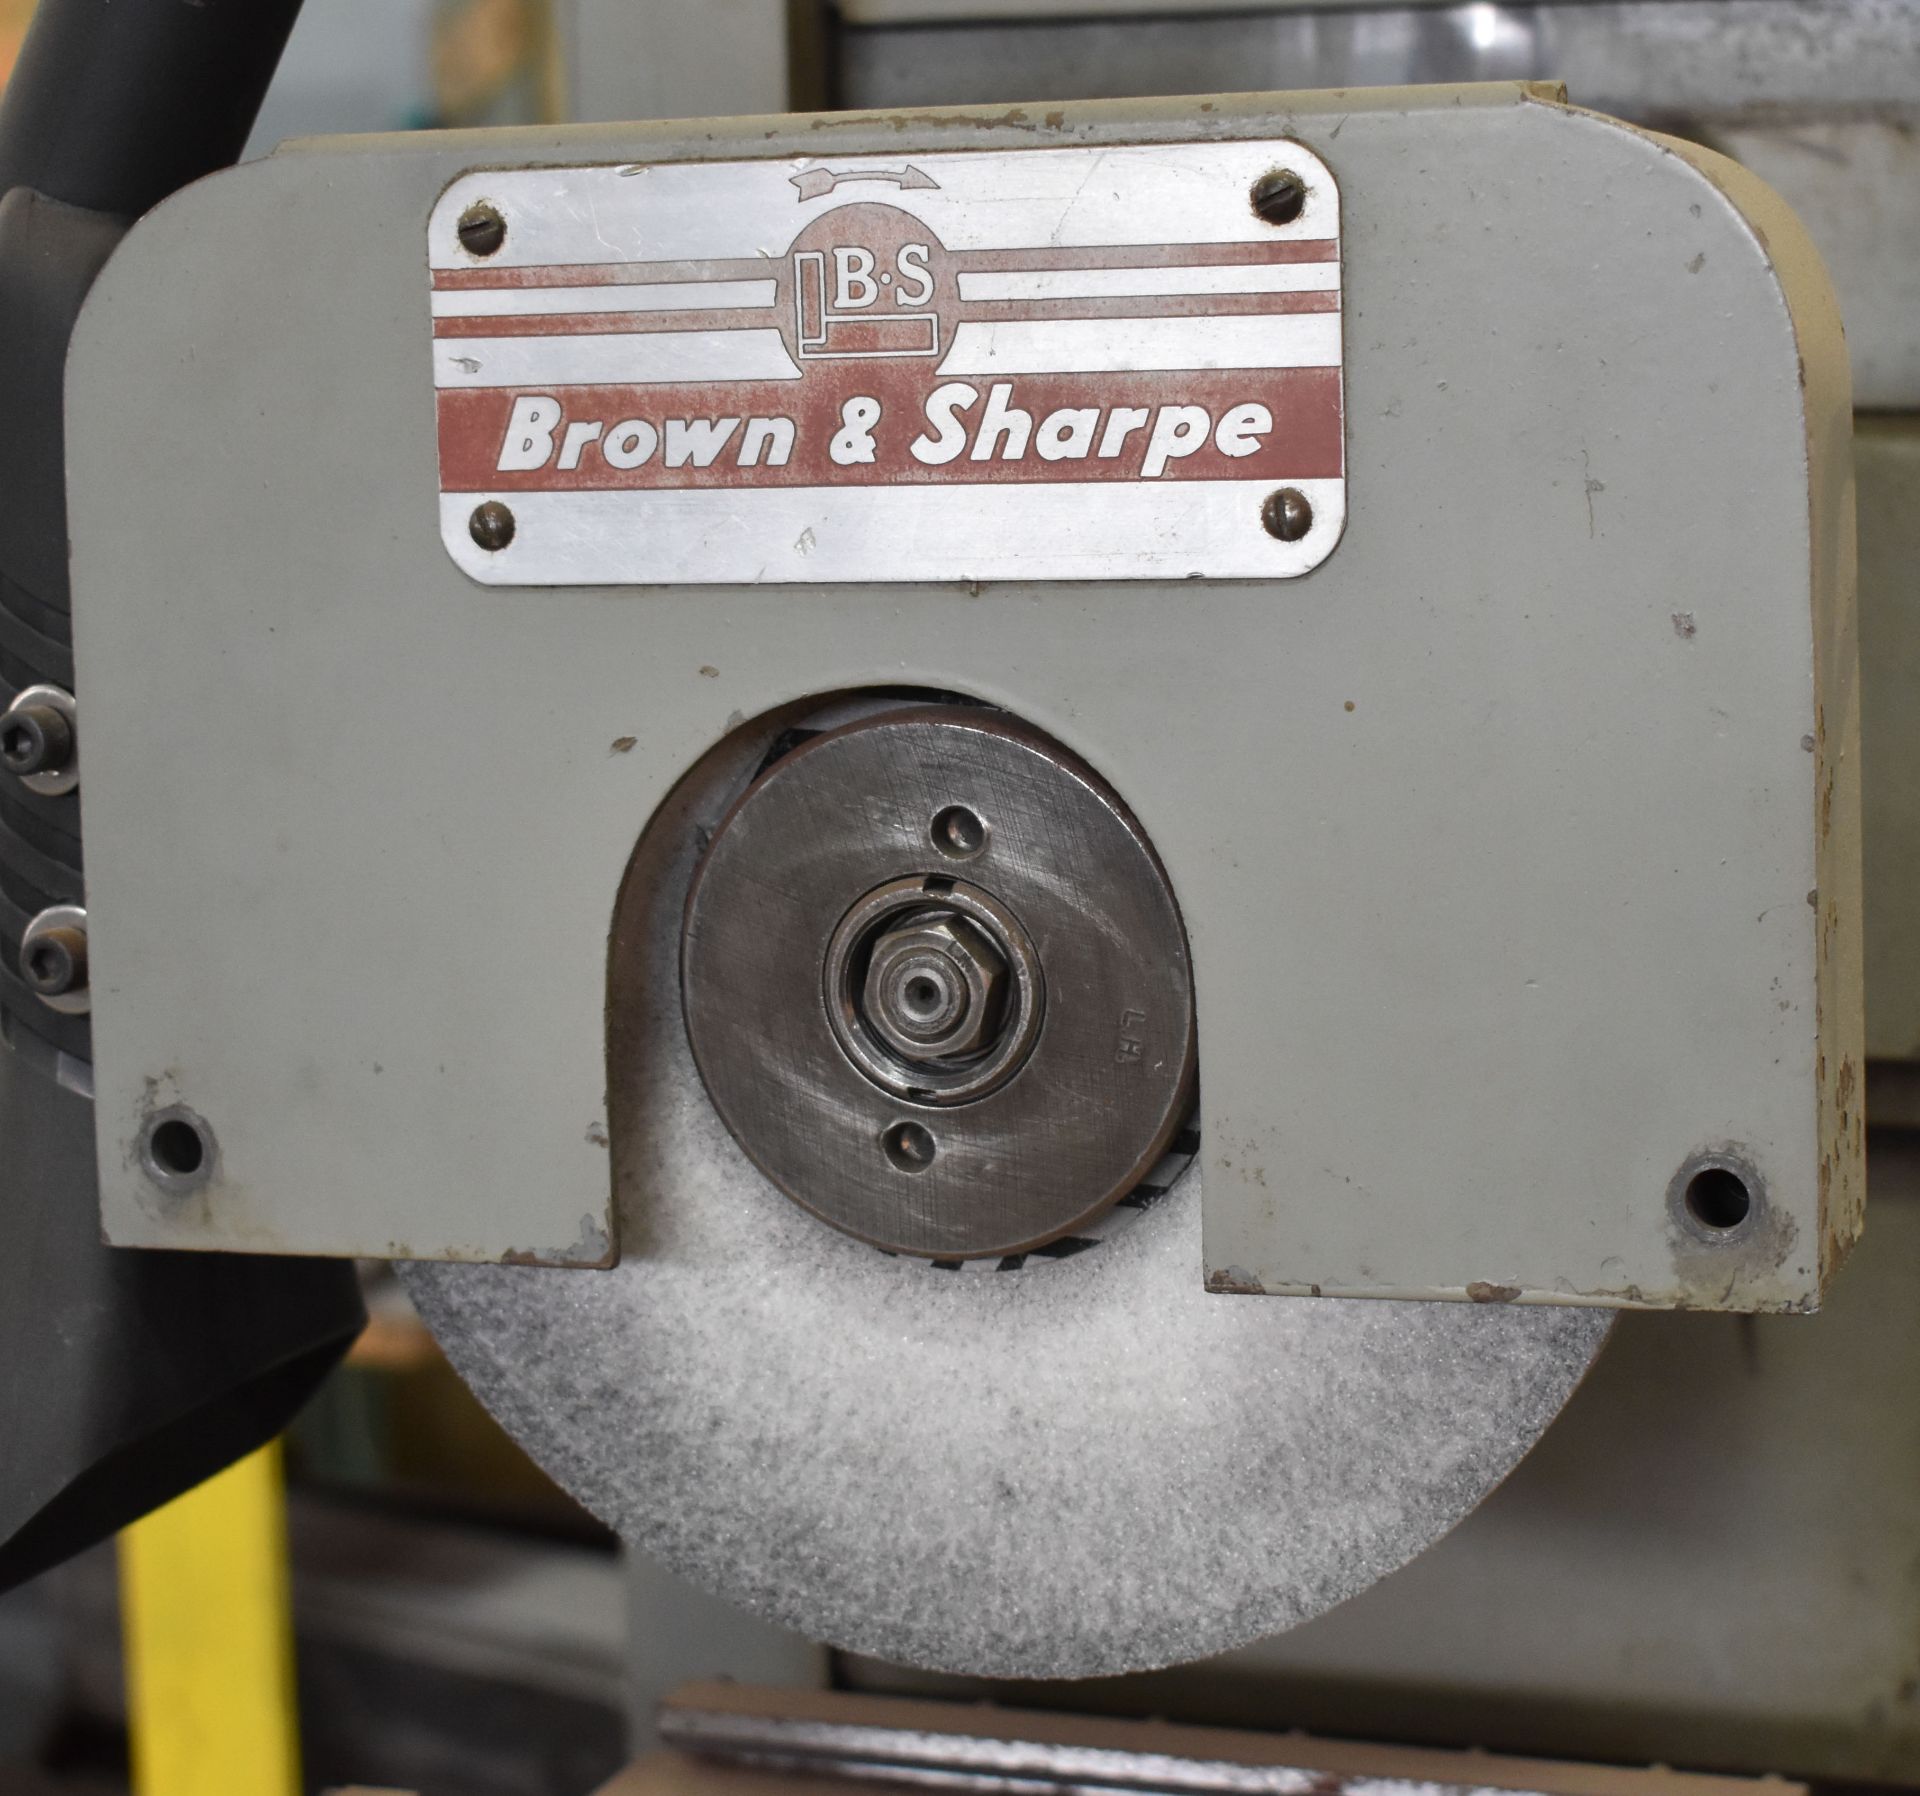 BROWN & SHARPE 510 MANUAL SURFACE GRINDER WITH 10"X5" MAGNETIC CHUCK, 7" WHEEL, S/N: 523-510-717 ( - Image 3 of 5